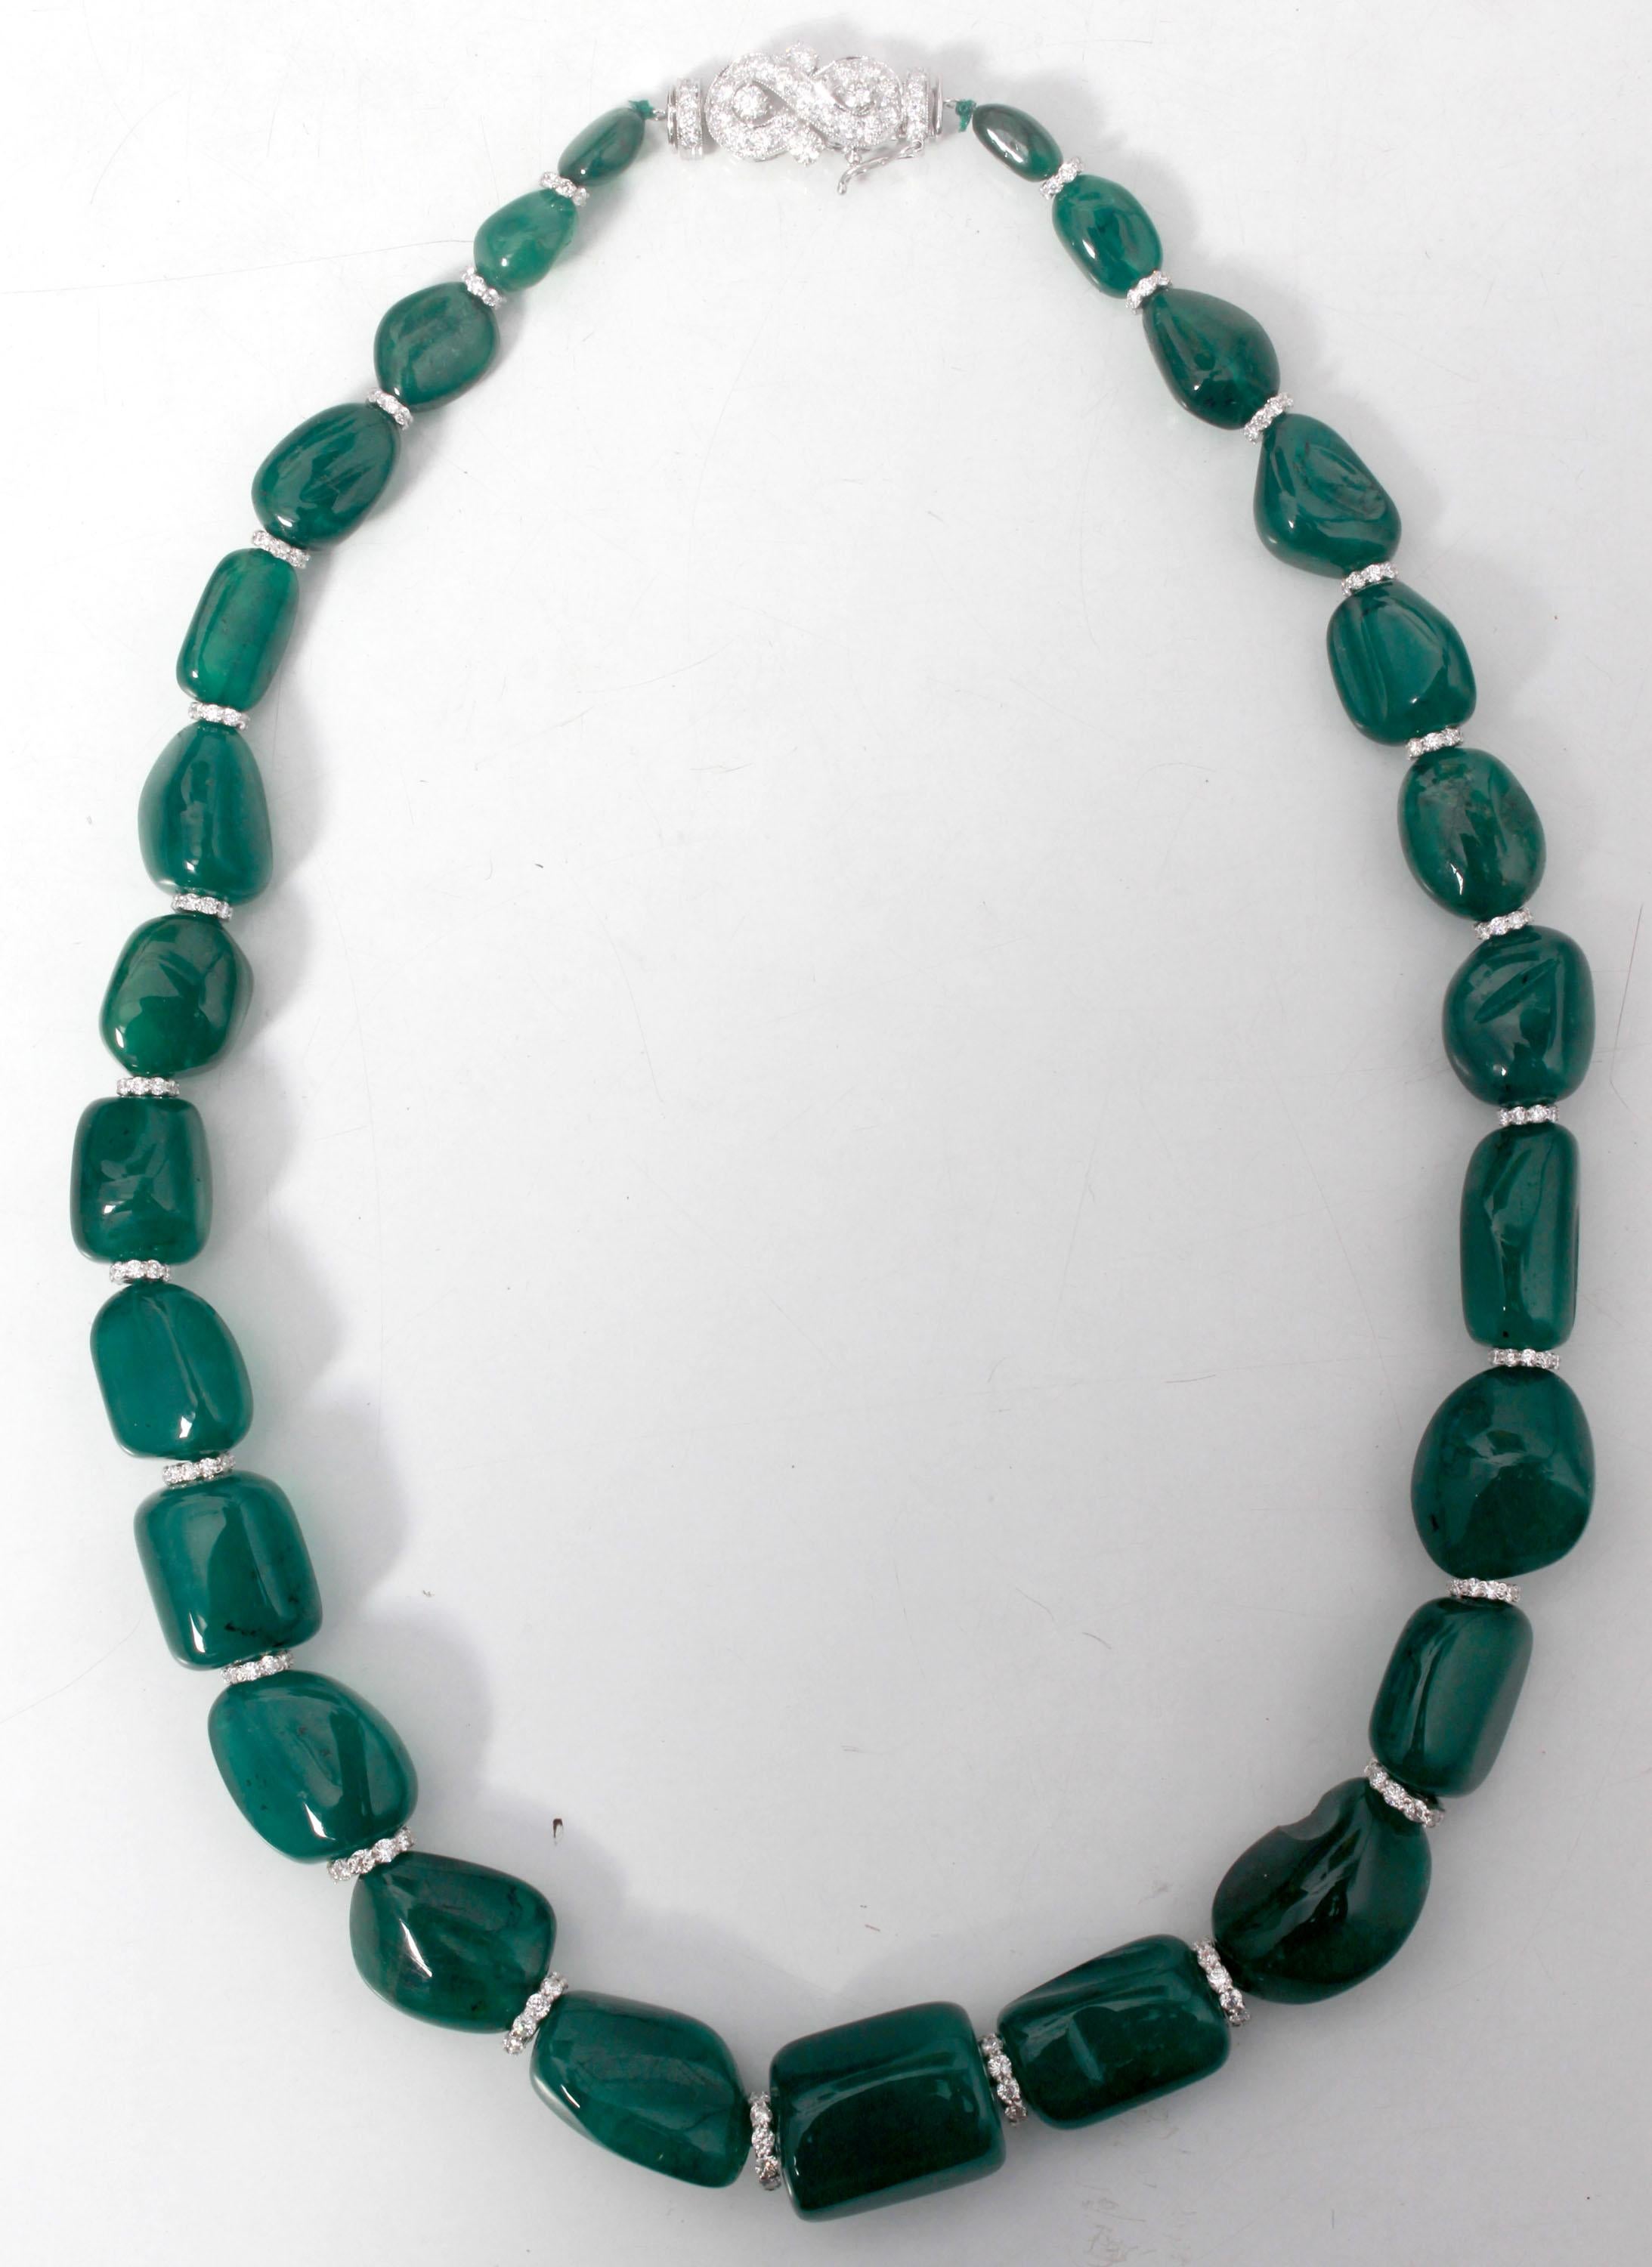 A single strand Zambian Emerald Necklace, which consist of 26 pieces which weigh 658.68 carats and includes 6.87 carats Round White Diamonds.
This necklace is made in 18K White Gold and weighs approximately 18.610 grams.
The clasp is also made of